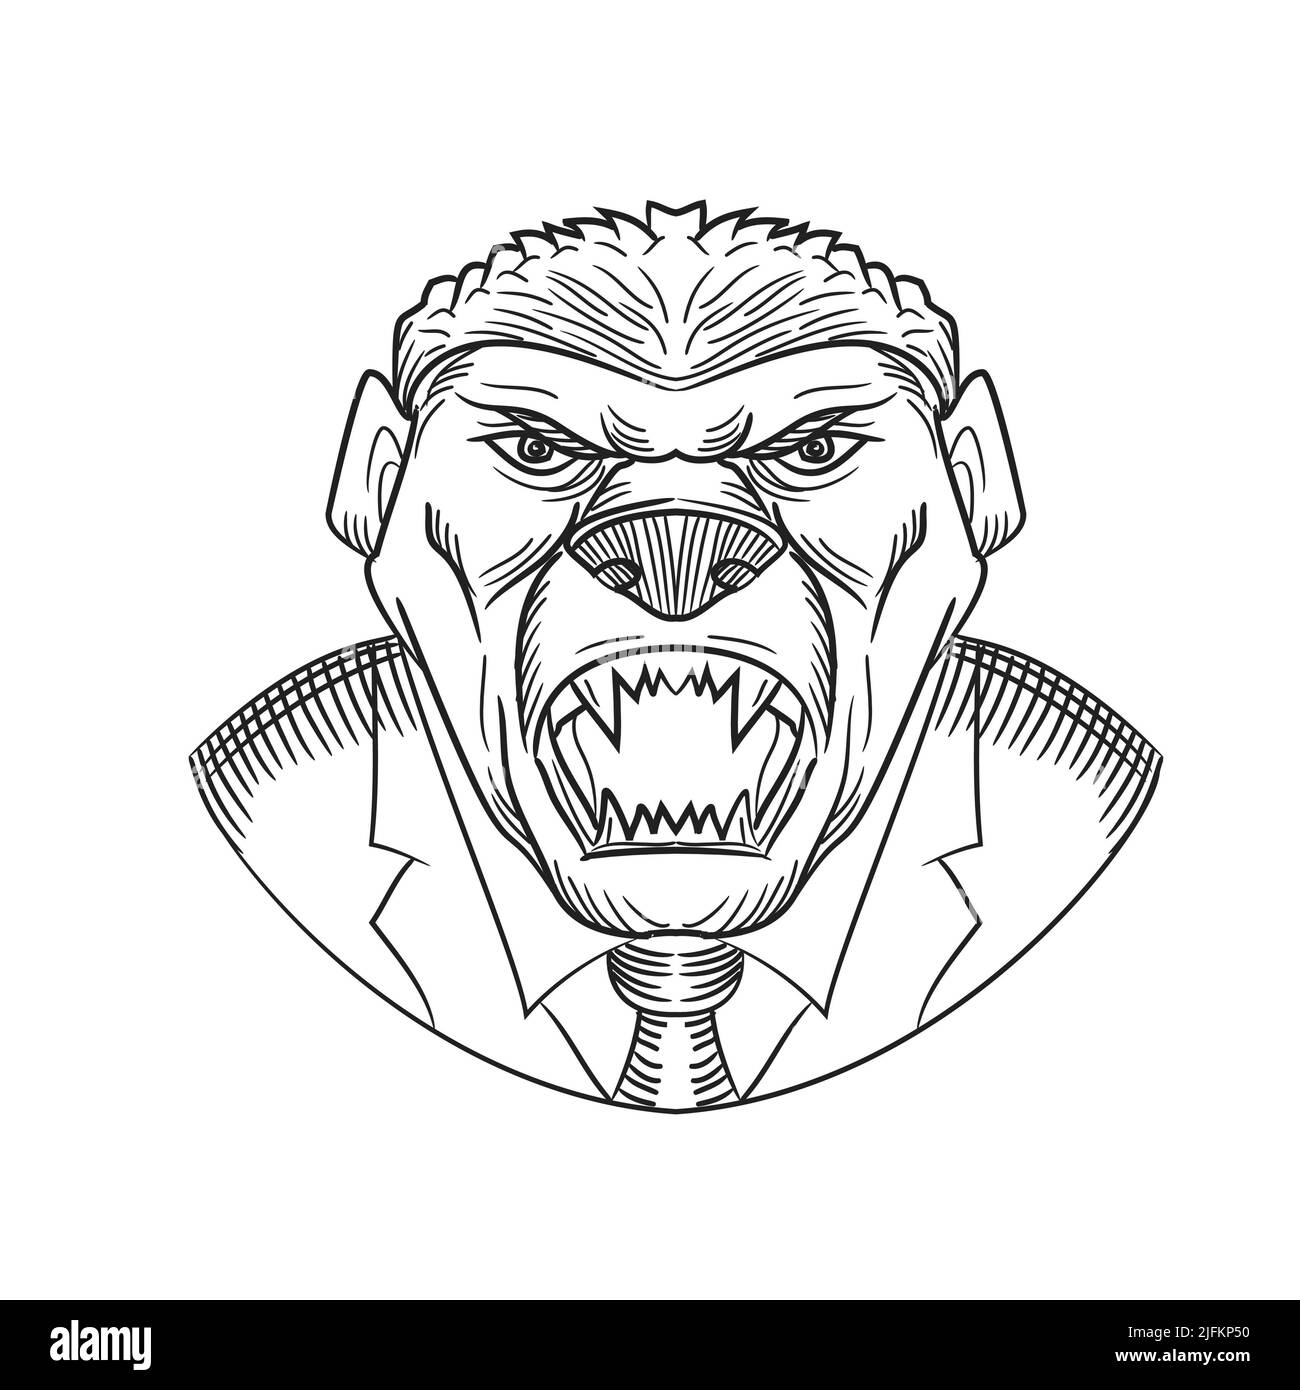 Drawing sketch style illustration head of an angry and aggressive honey badger wearing a coat and tie or business suit viewed from front on isolated Stock Photo